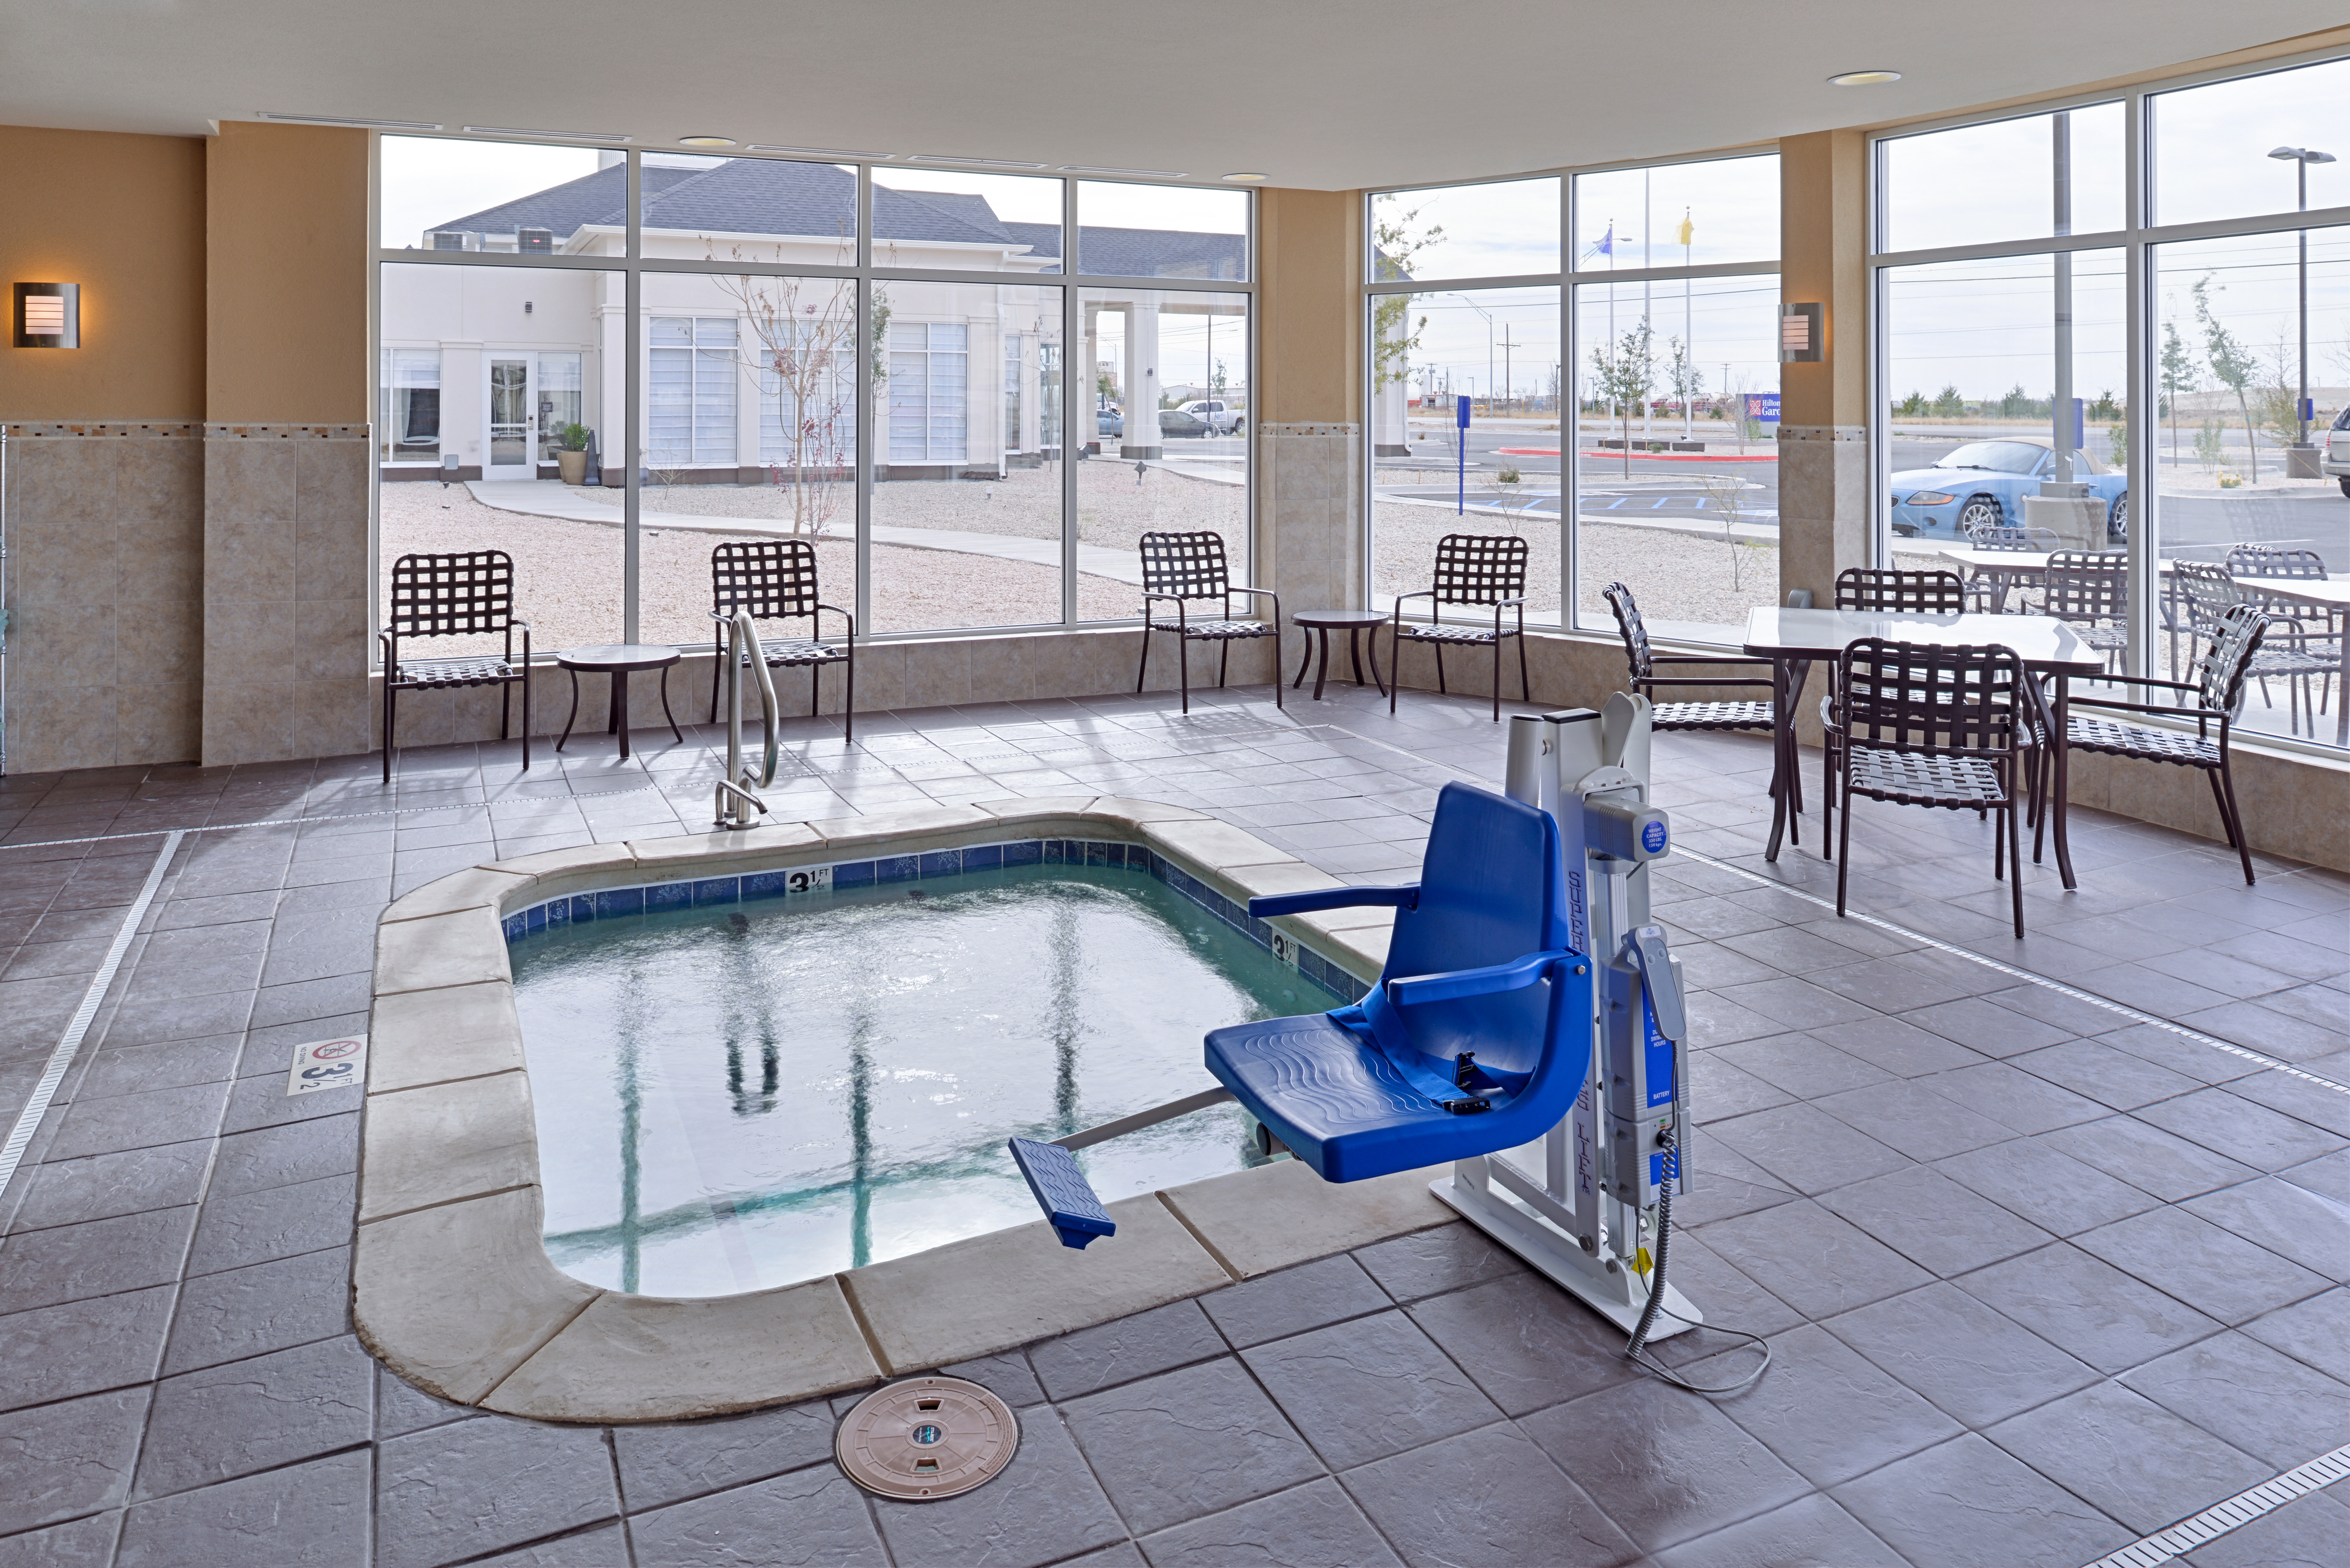 Hot Tub Surrounded by Windows, Tables, and Chairs